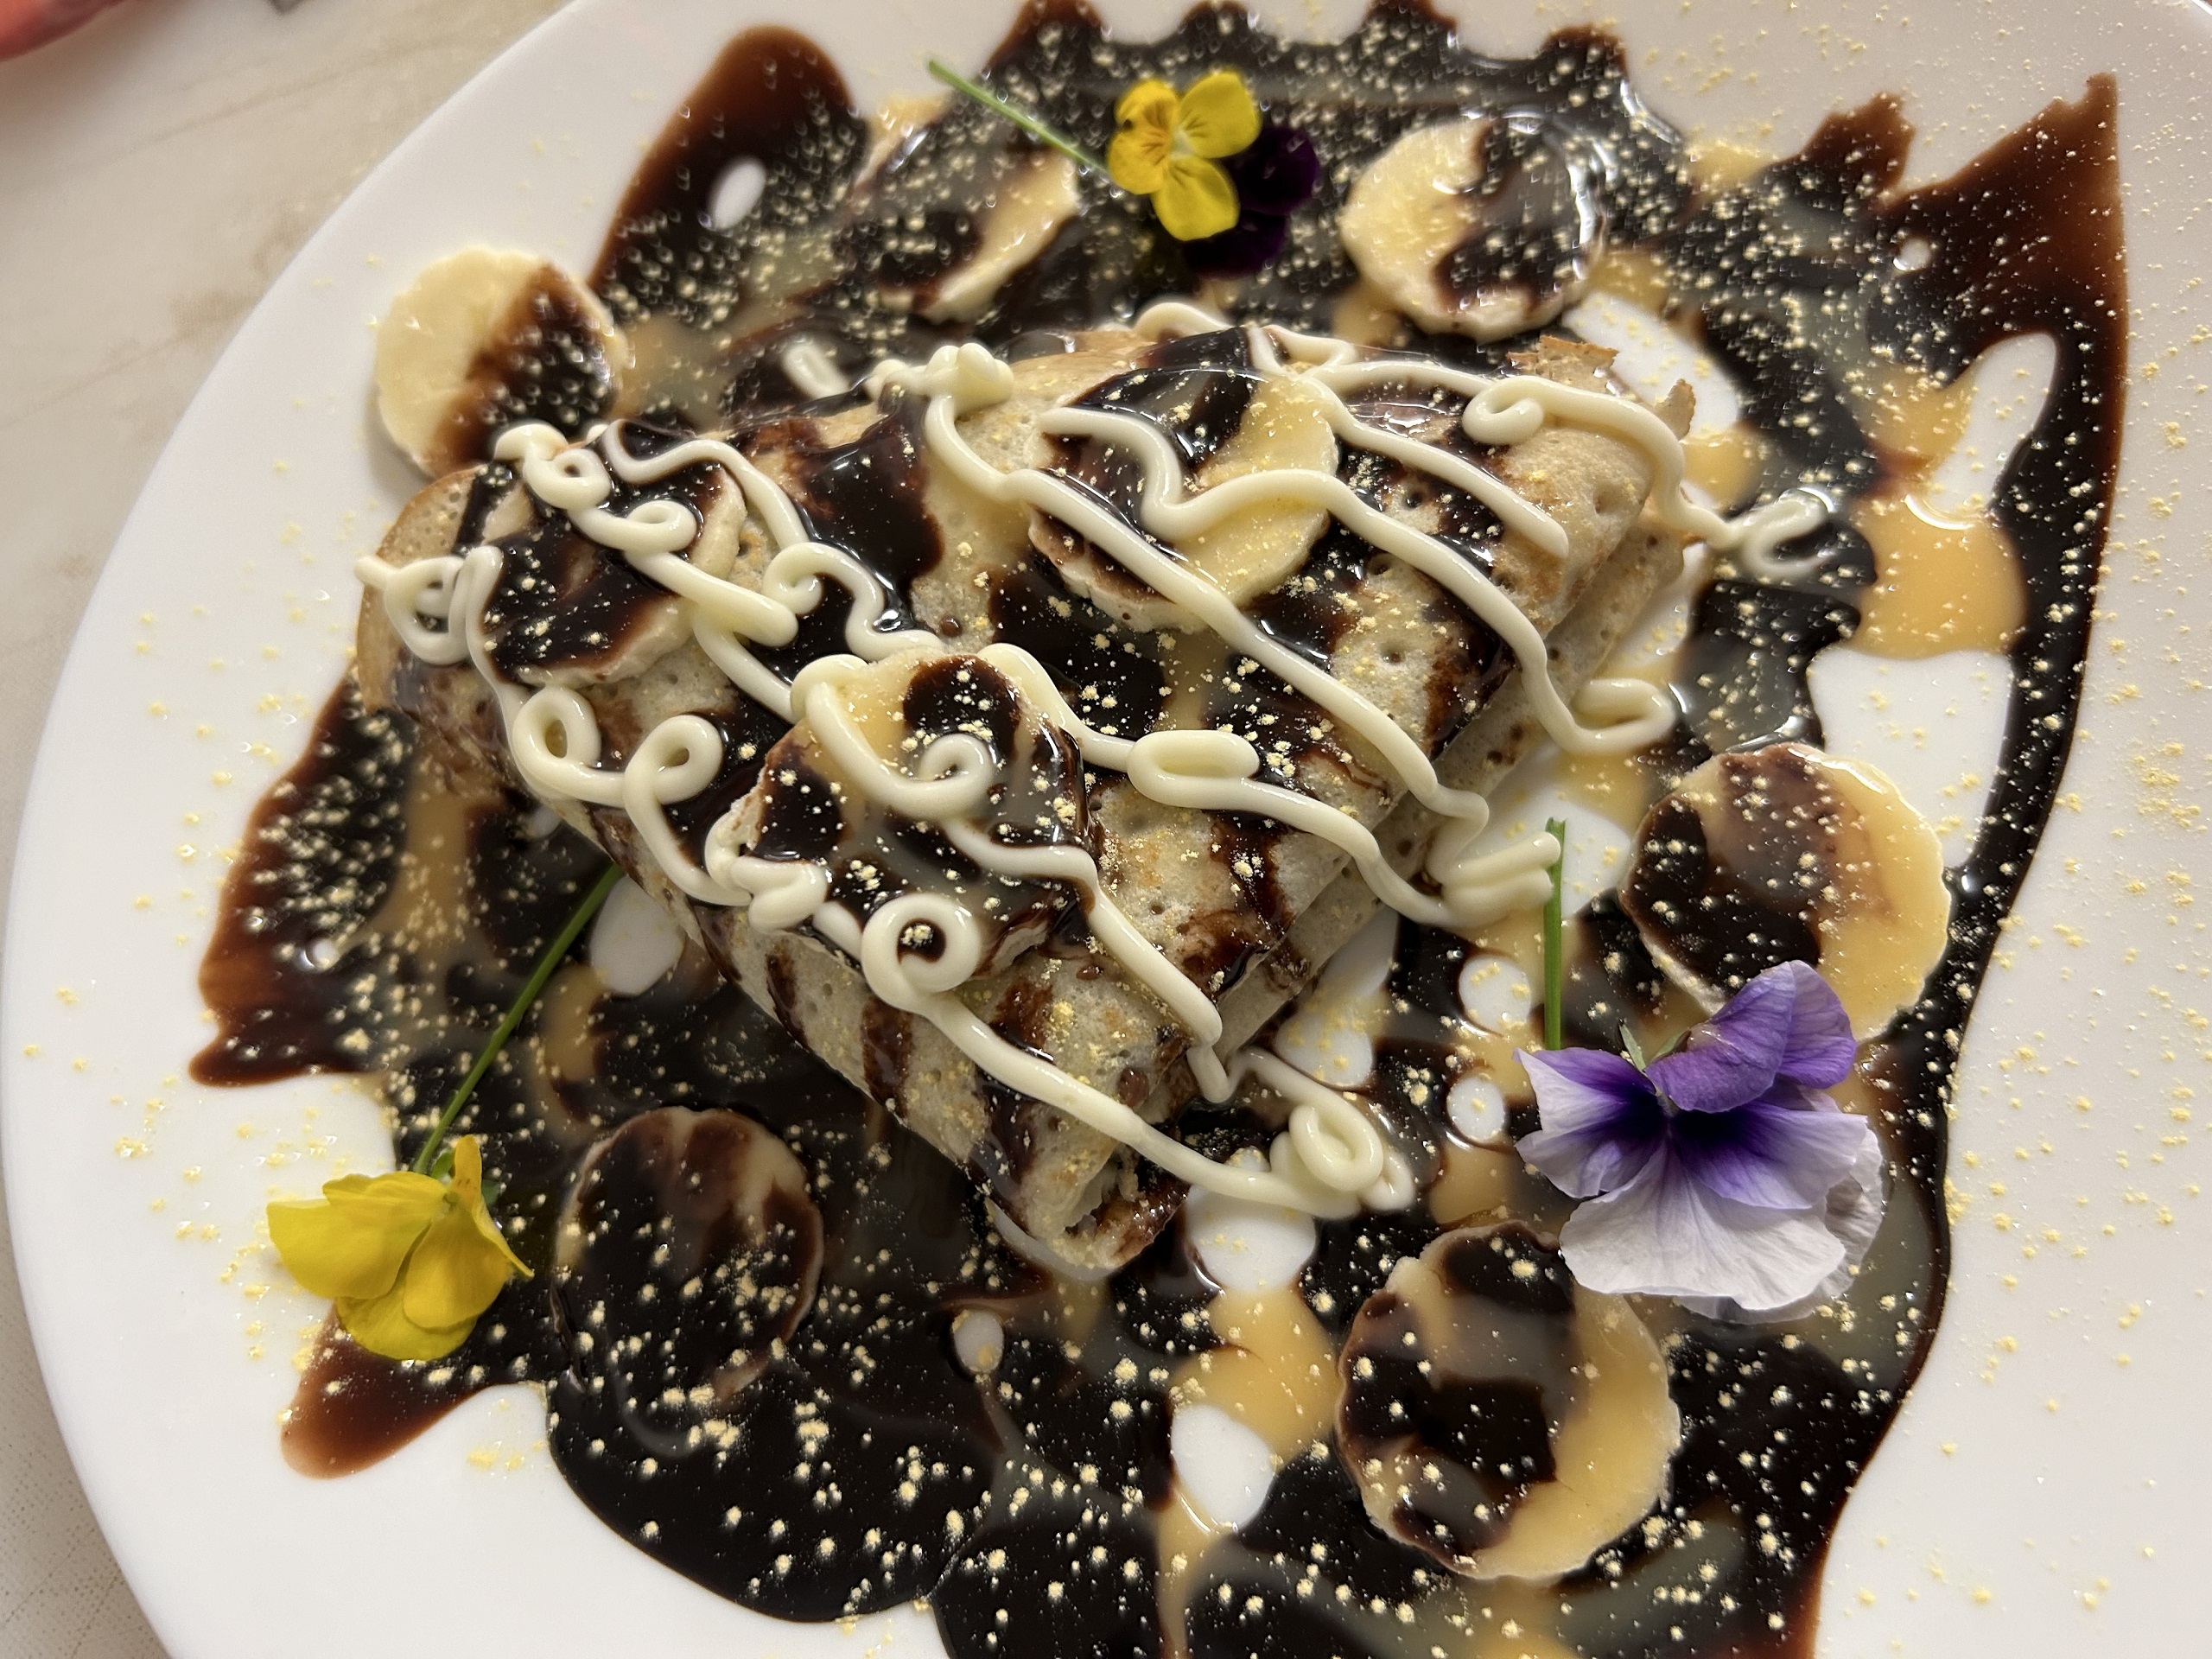 Kat's Nutella and Banana Blintz covered in chocolate sauce and sliced bananas with a swiggle of sweet cream on a white plain garinshed with edible flowers.